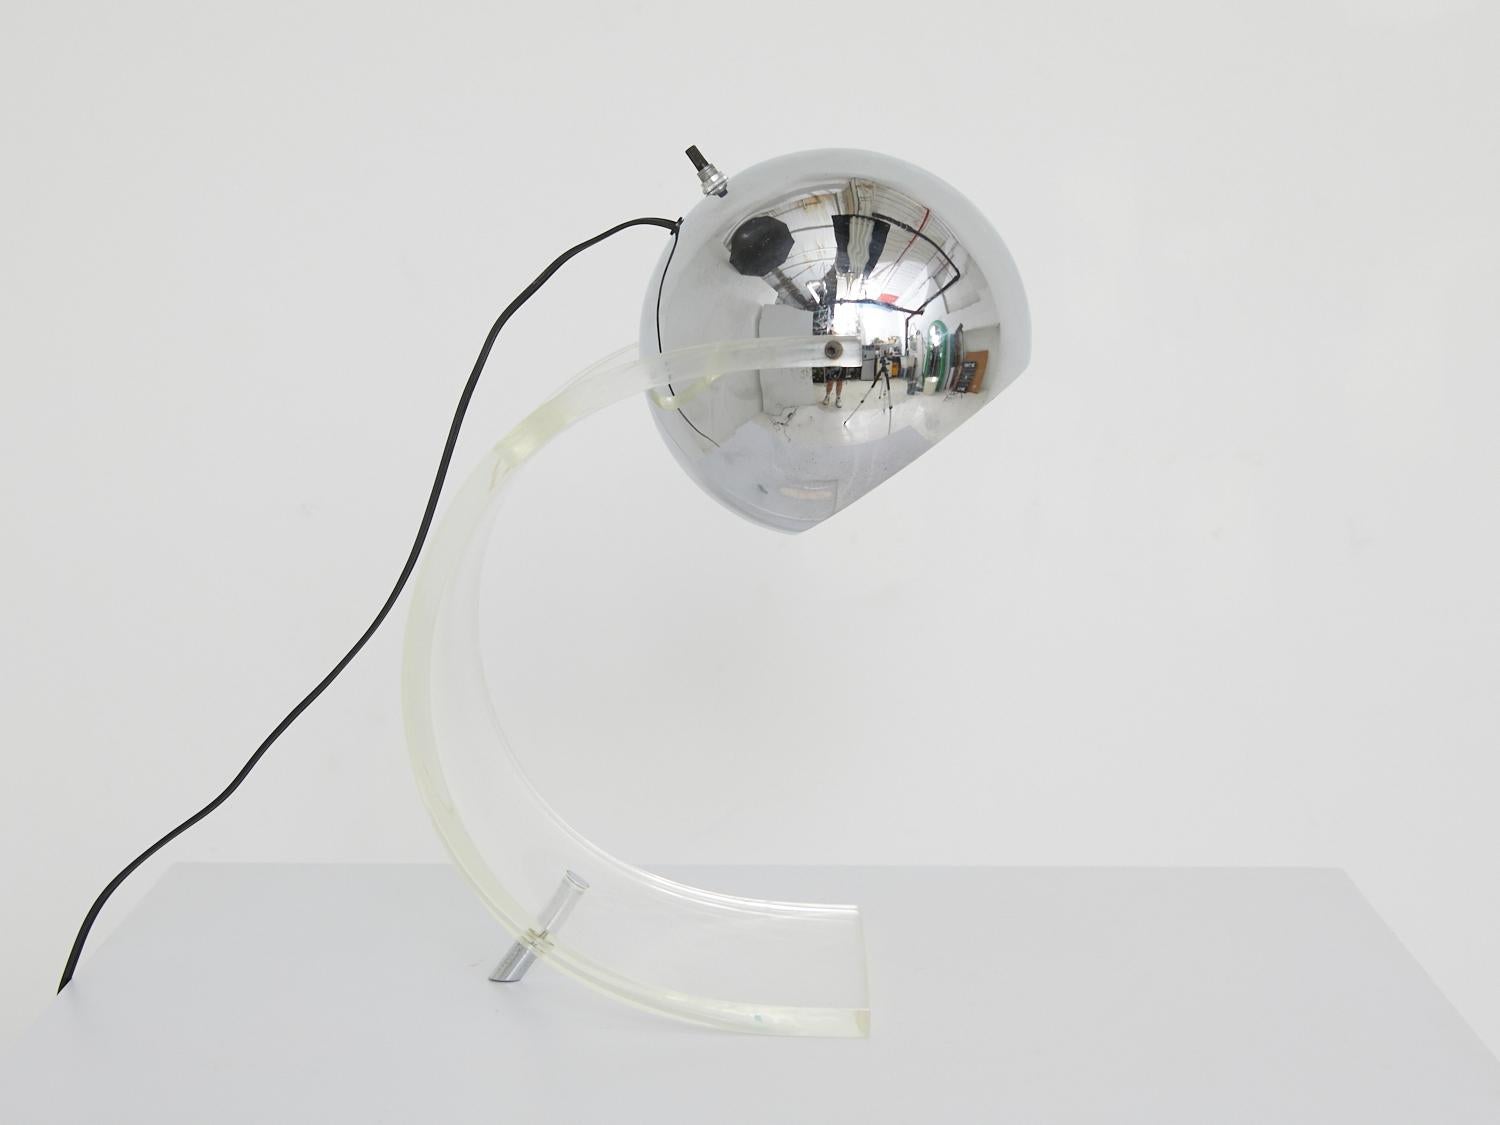 Add a dash of whimsy to your tabletop with this lamp that knows how to have fun. Its curvy silhouette and glossy chrome details create a lighthearted vibe, while the Lucite body adds a touch of modern cool. It's the ideal companion for those who